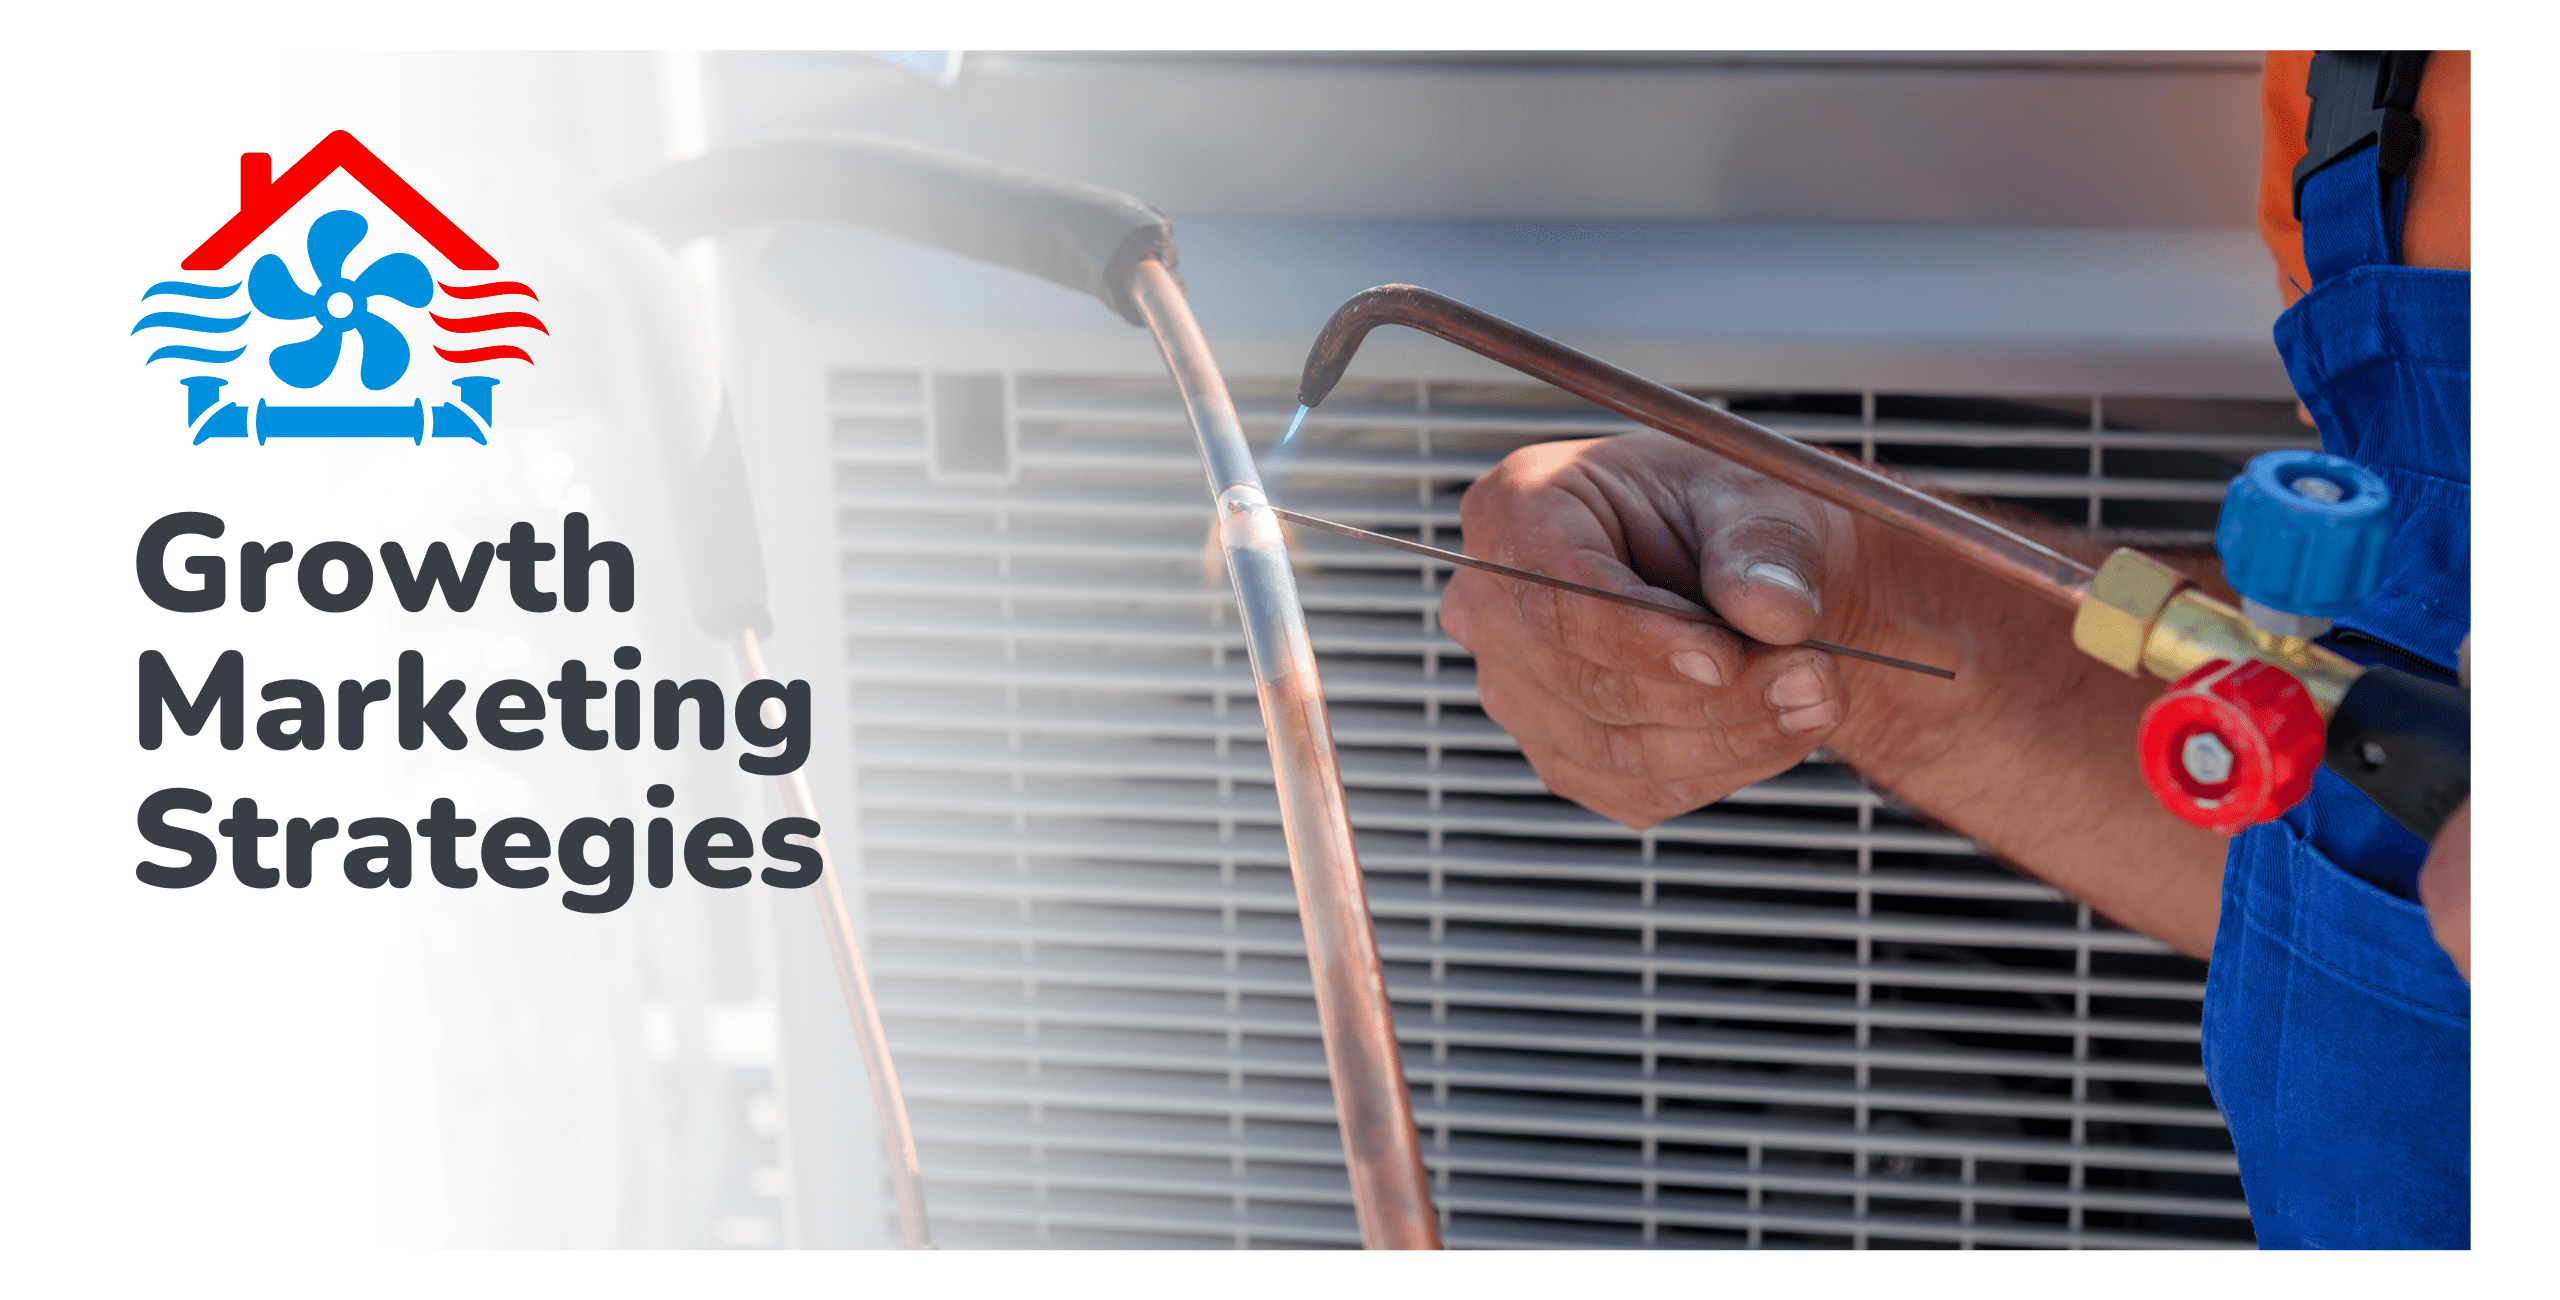 Introduction to Growth Marketing for HVAC Businesses